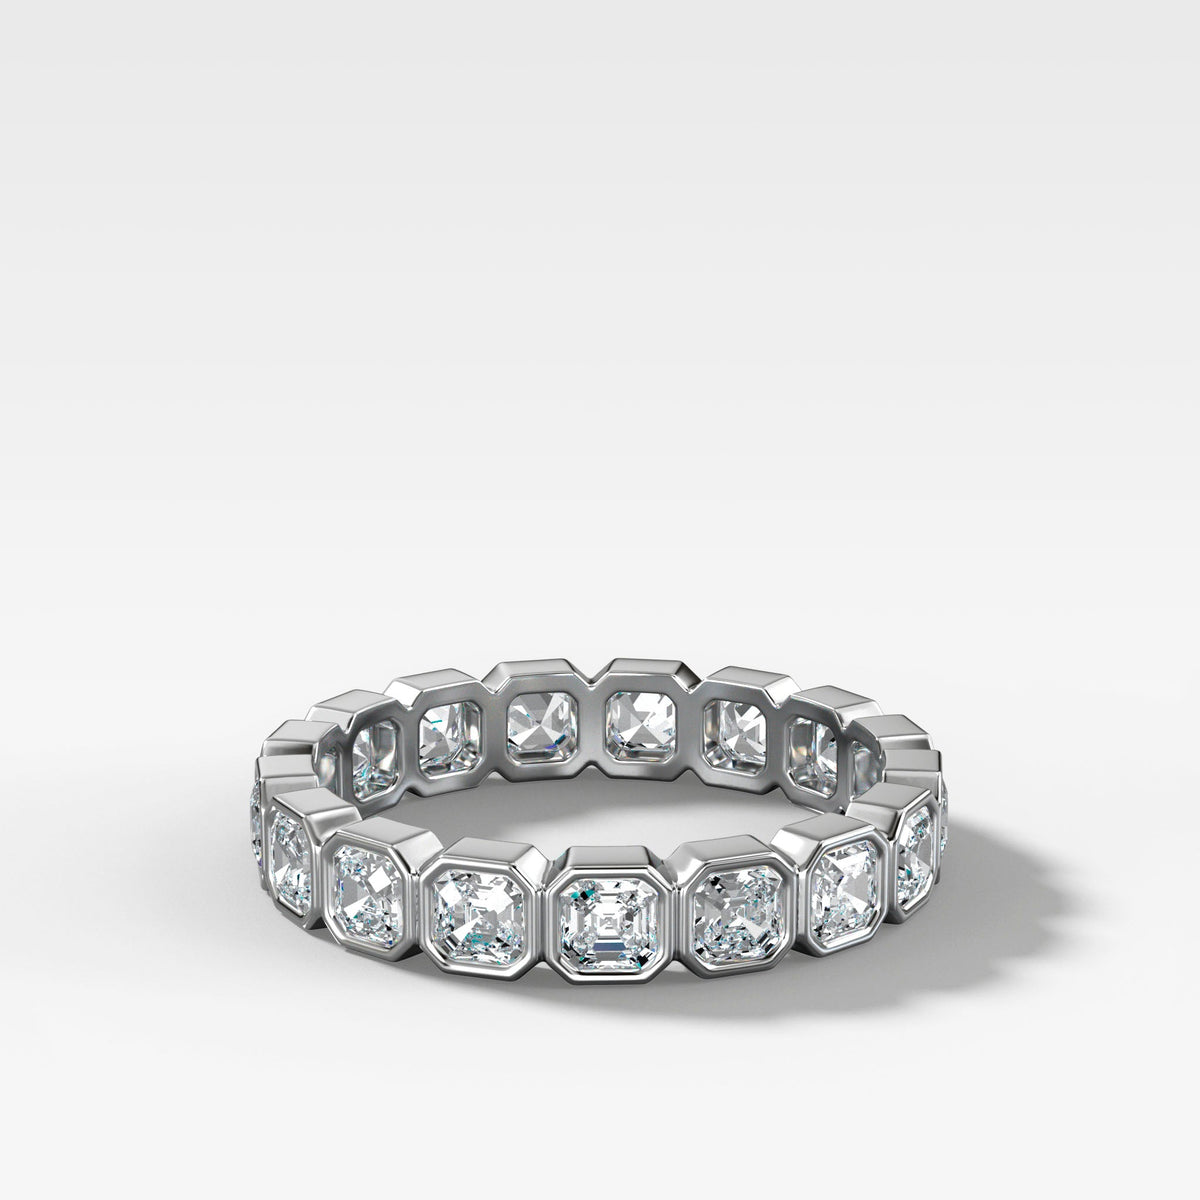 Baby Bezel Set Eternity Band With Asscher Cuts in White Gold by Good Stone